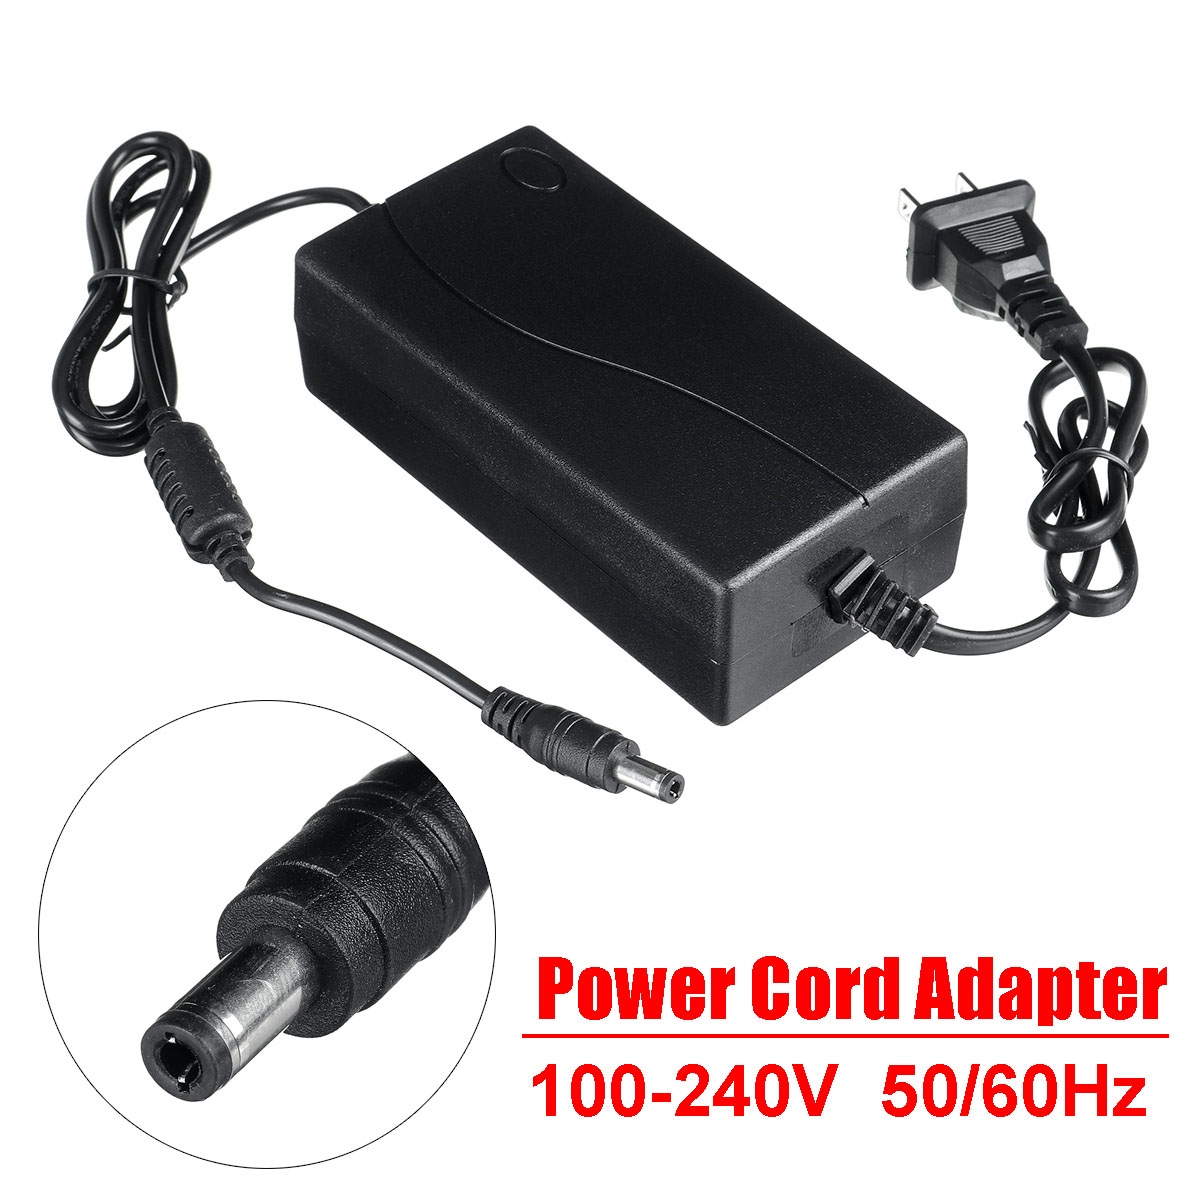 100-240V-6A-Power-Cord-Adapter-50--60HZ-Power-Cable-Adapter-Laptop-Charger-1790400-1